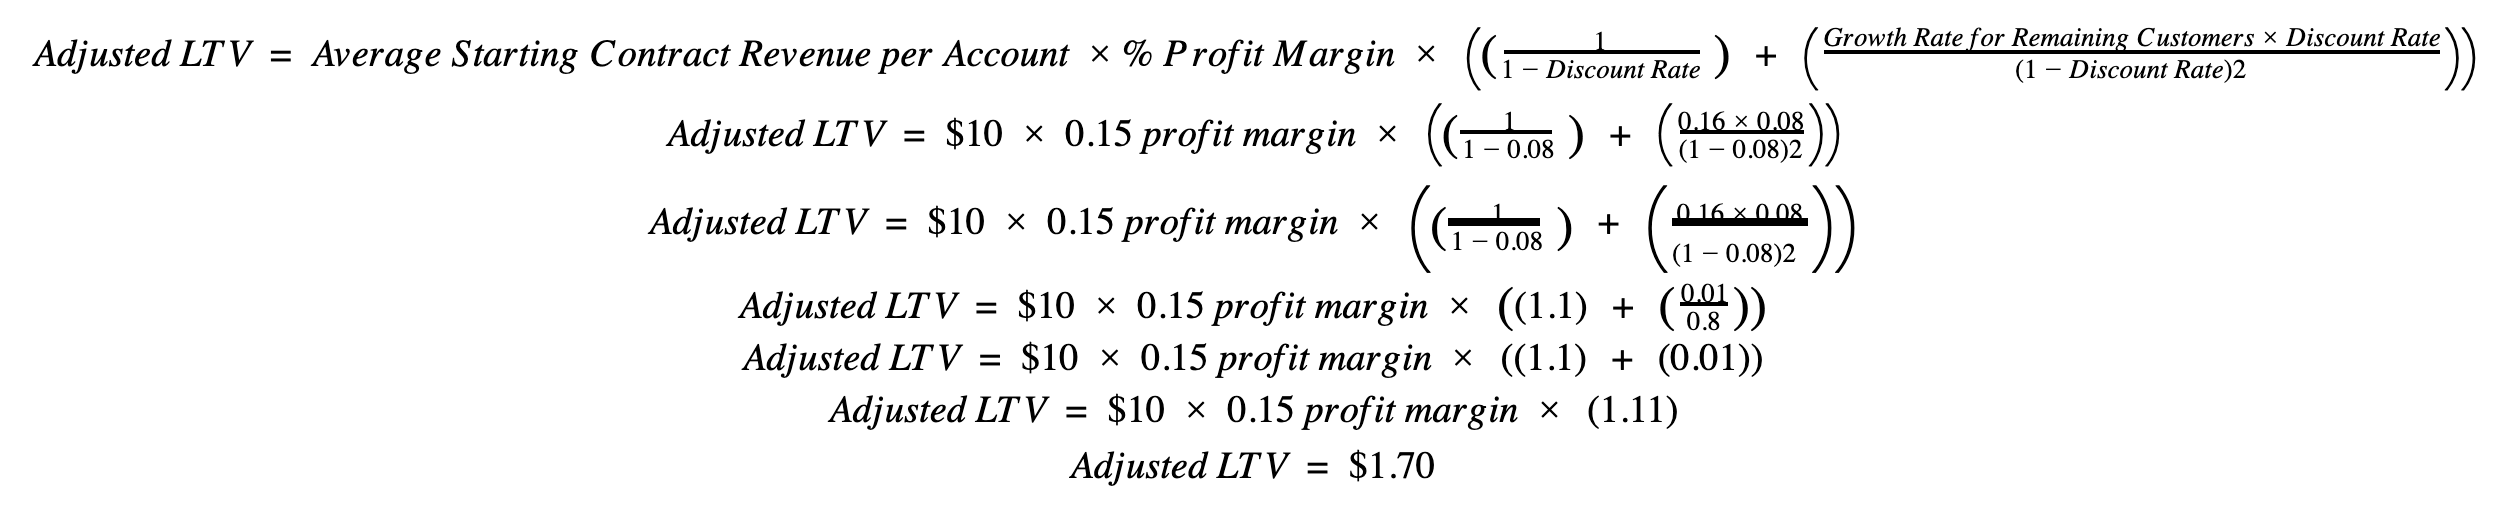 Adjusted Traditional LTV Calculation Example